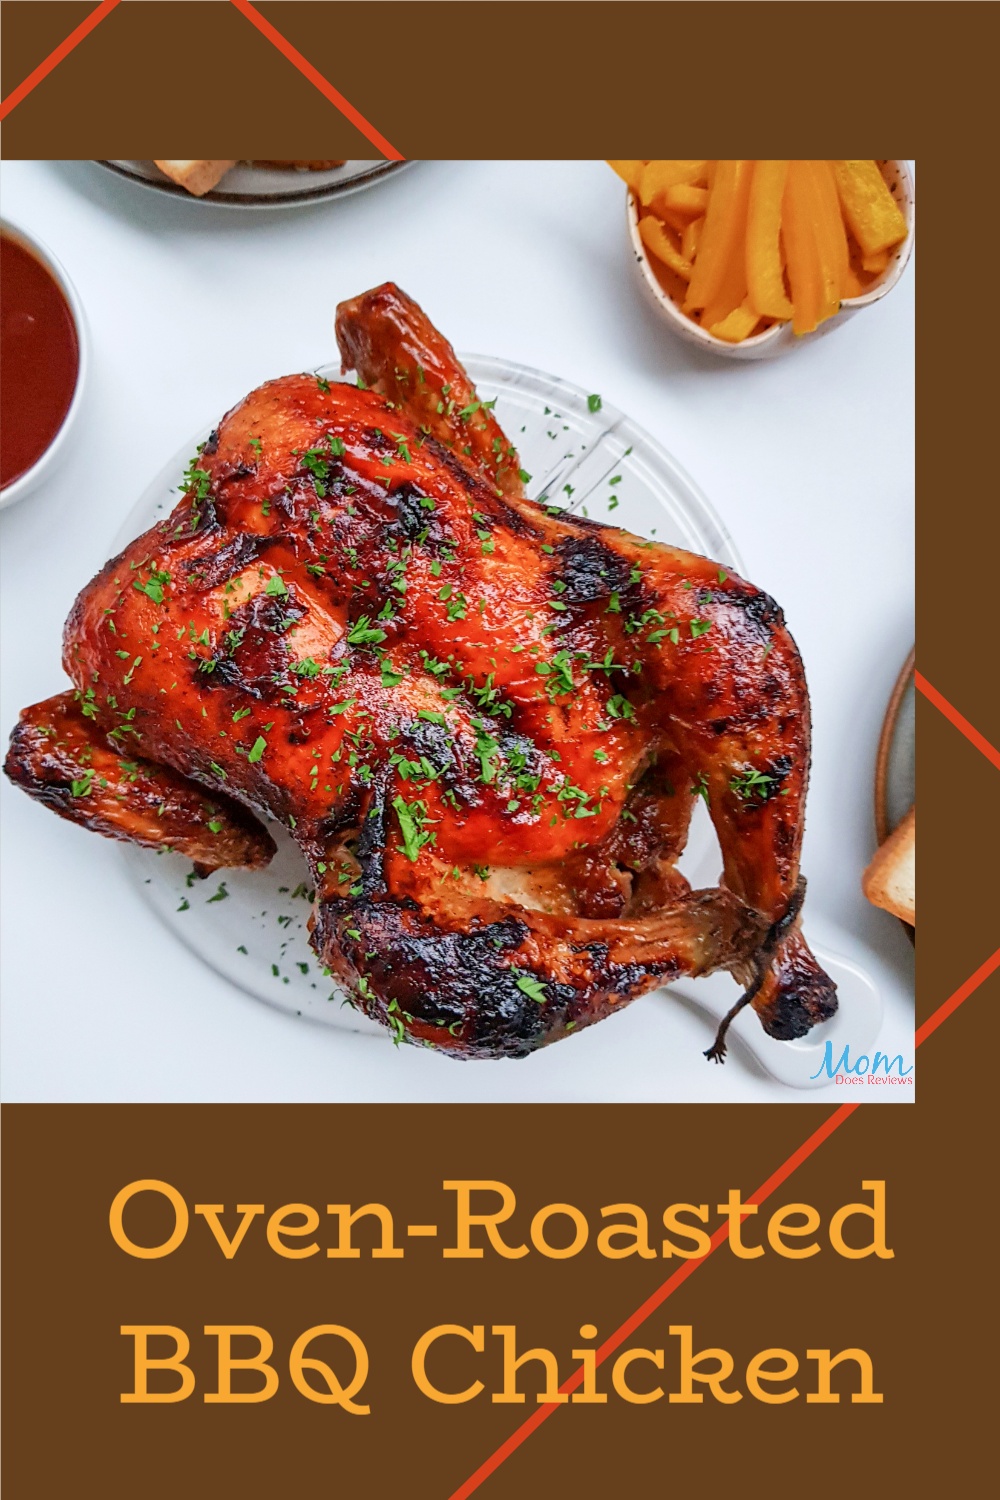 Oven-Roasted BBQ Chicken Recipe #chicken #familymeal #foodie